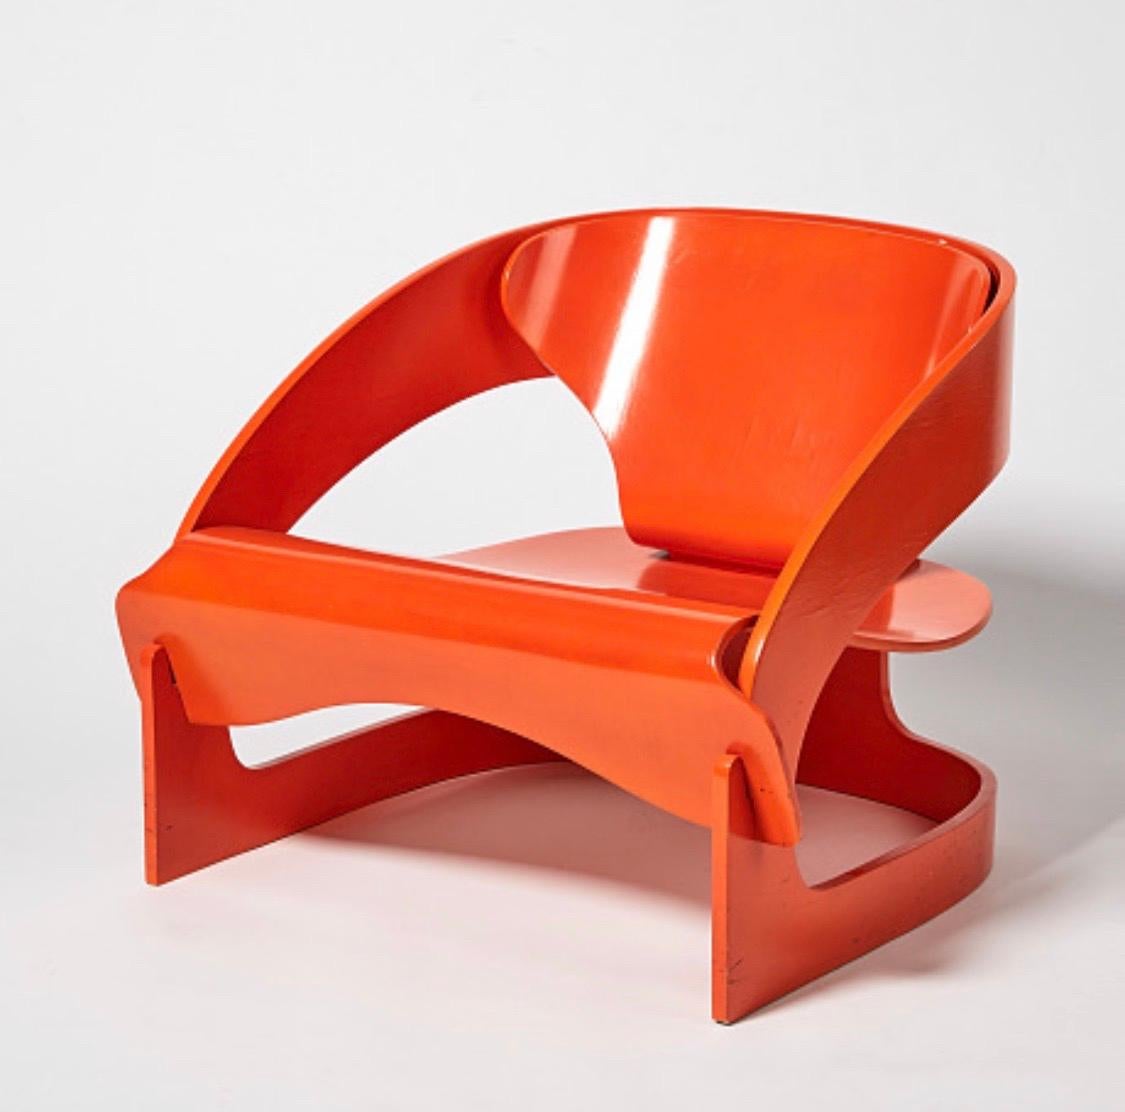 Iconic all original 4801 lounge chair by Joe Colombo for Kartell 1960s.

Excellent condition without chips to either the plywood nor the paint. 

Size: 59cm / 23.2